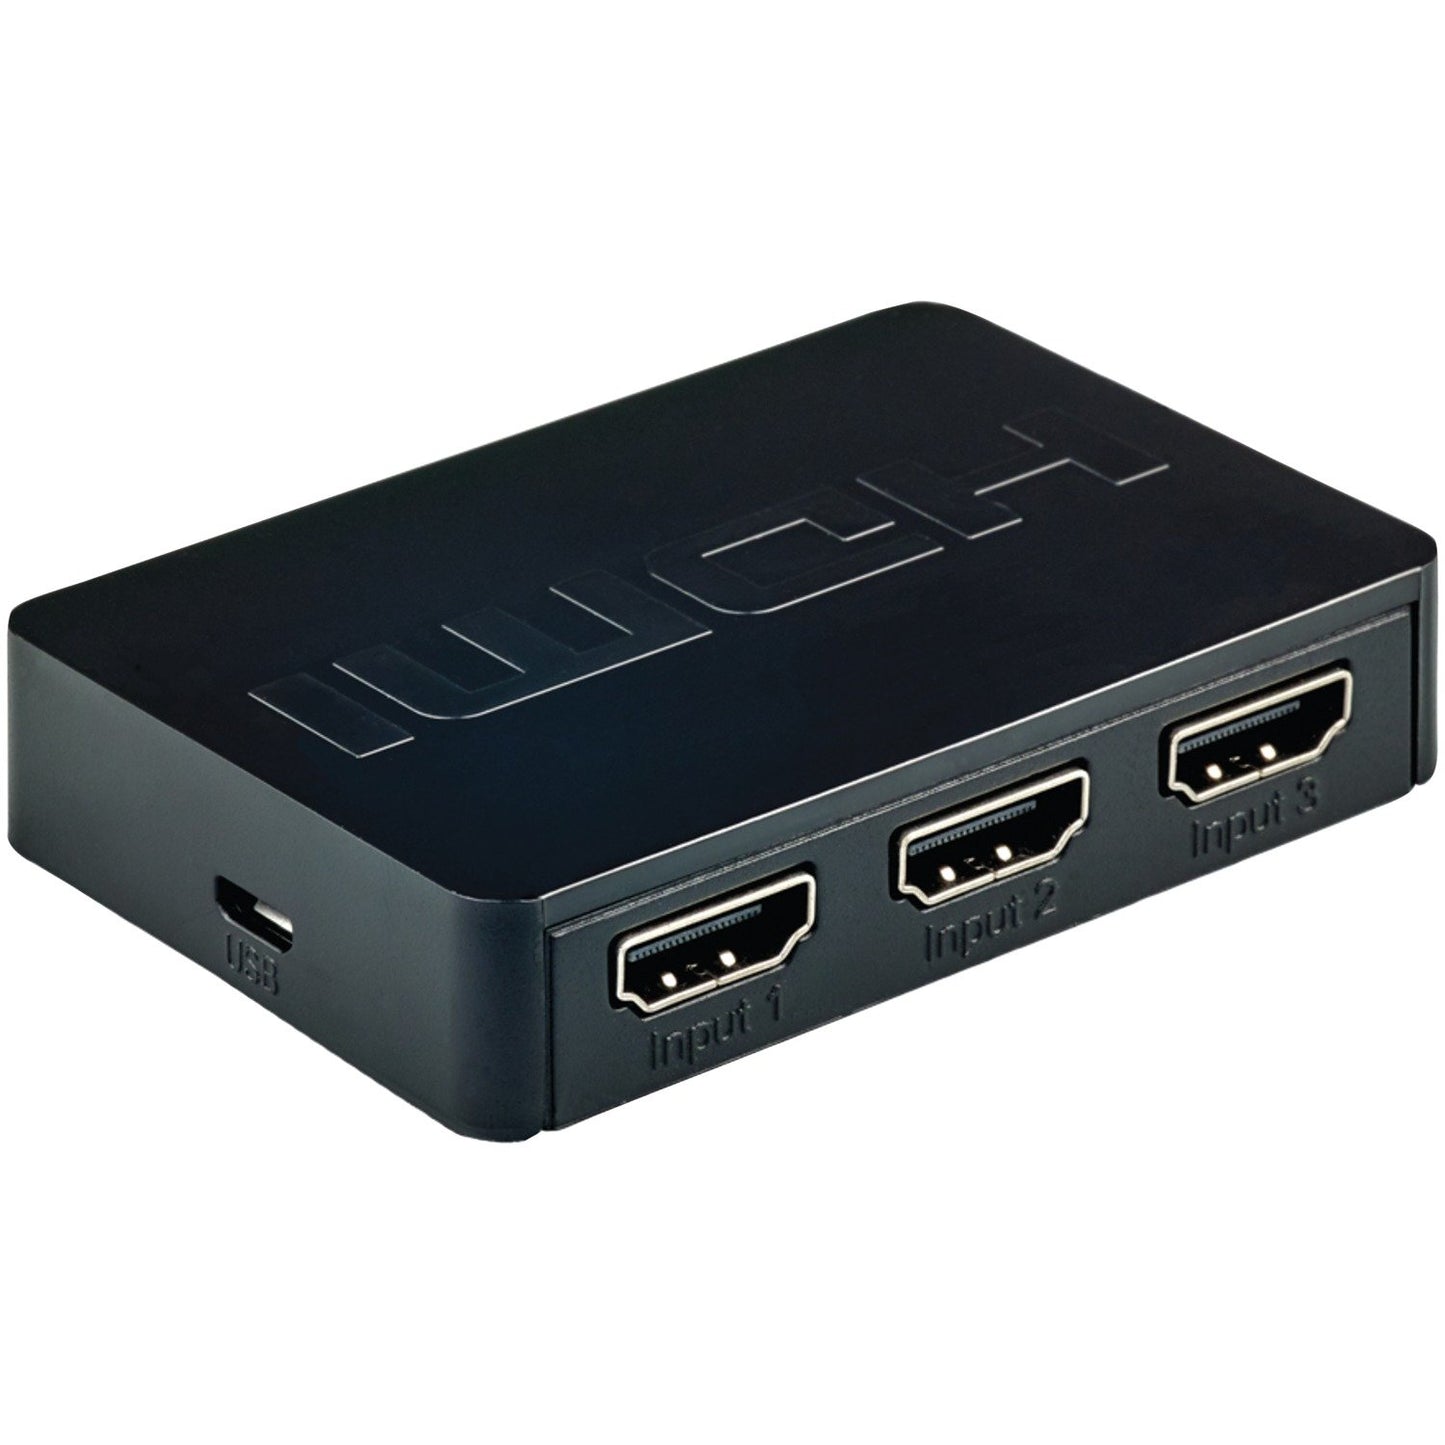 RCA DHSWITCHE HDMI Switcher